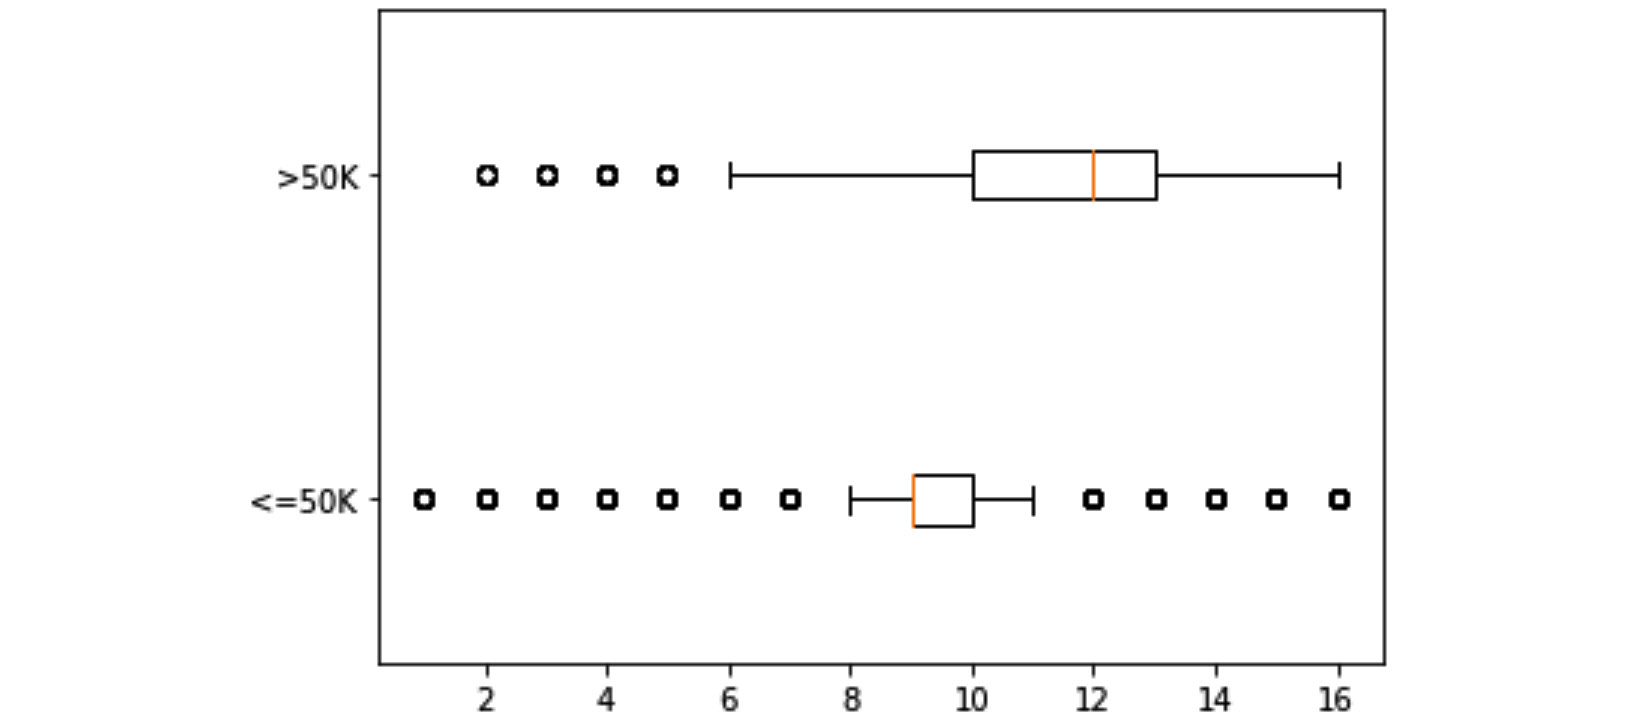 Figure 5.3 – Boxplots of education-num for two populations of income <=50K and >50K
